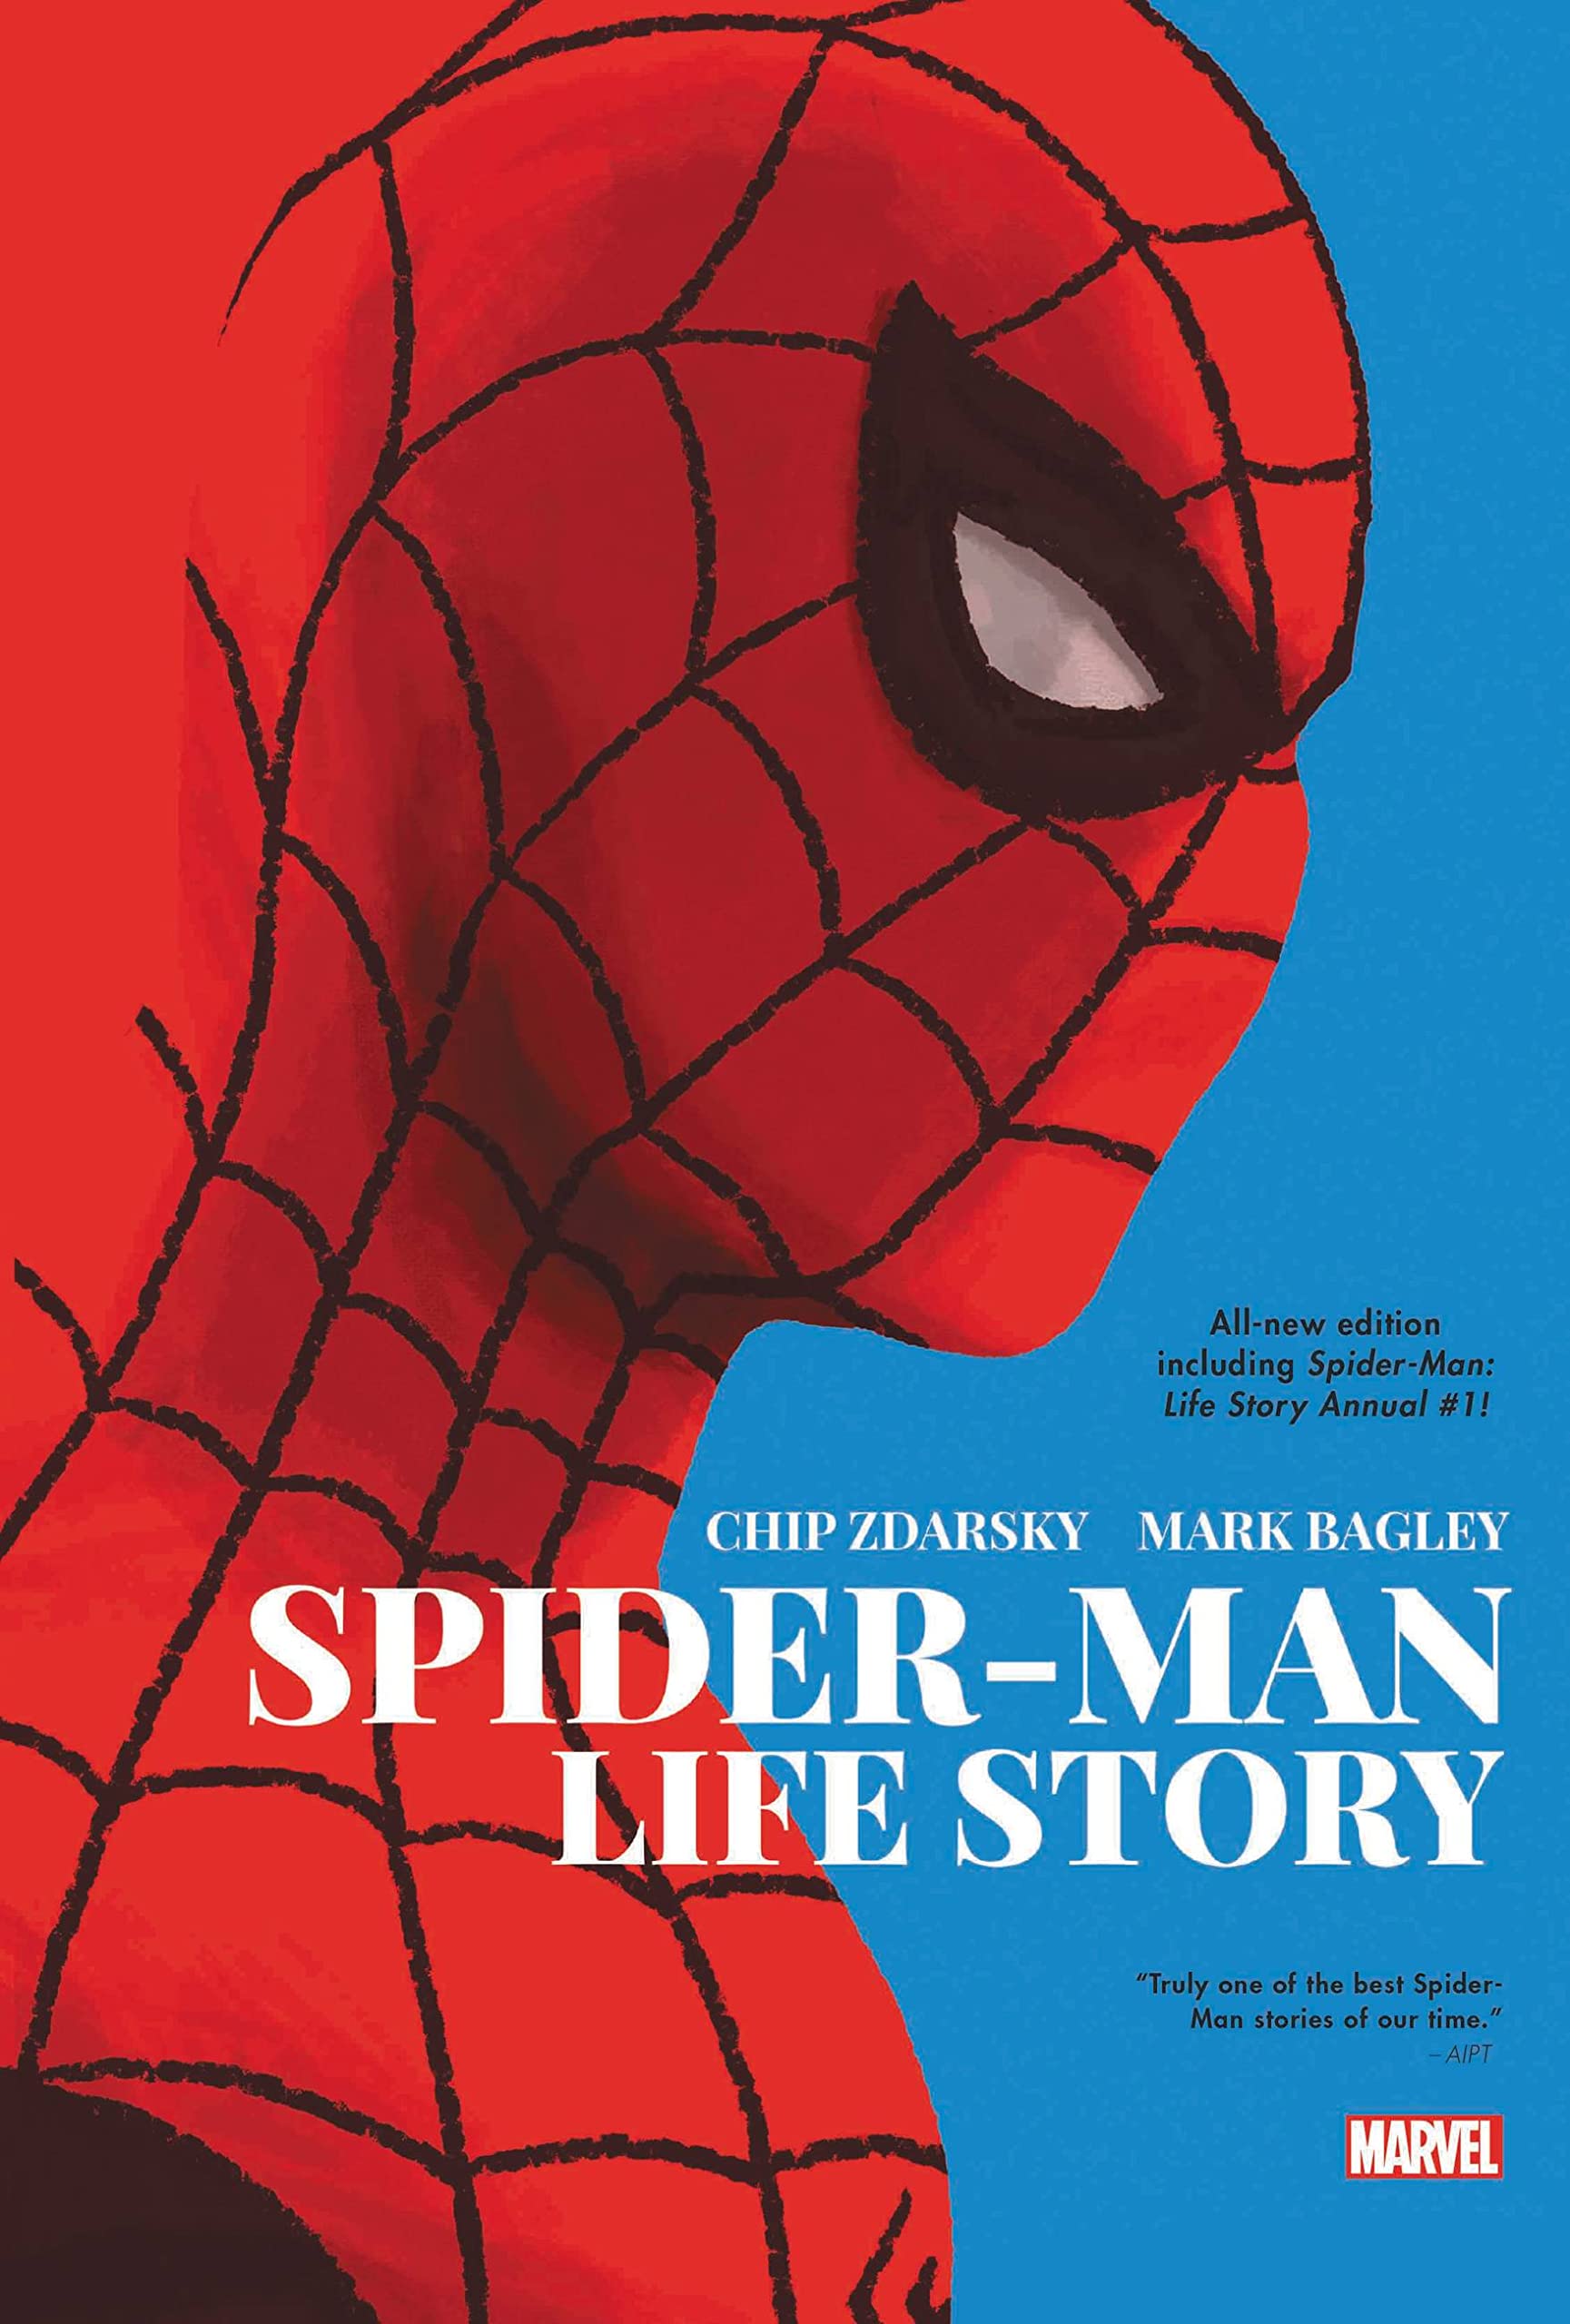 Cover of “Spider-Man: Life Story” by Chip Zdarsky and Mark Bagley